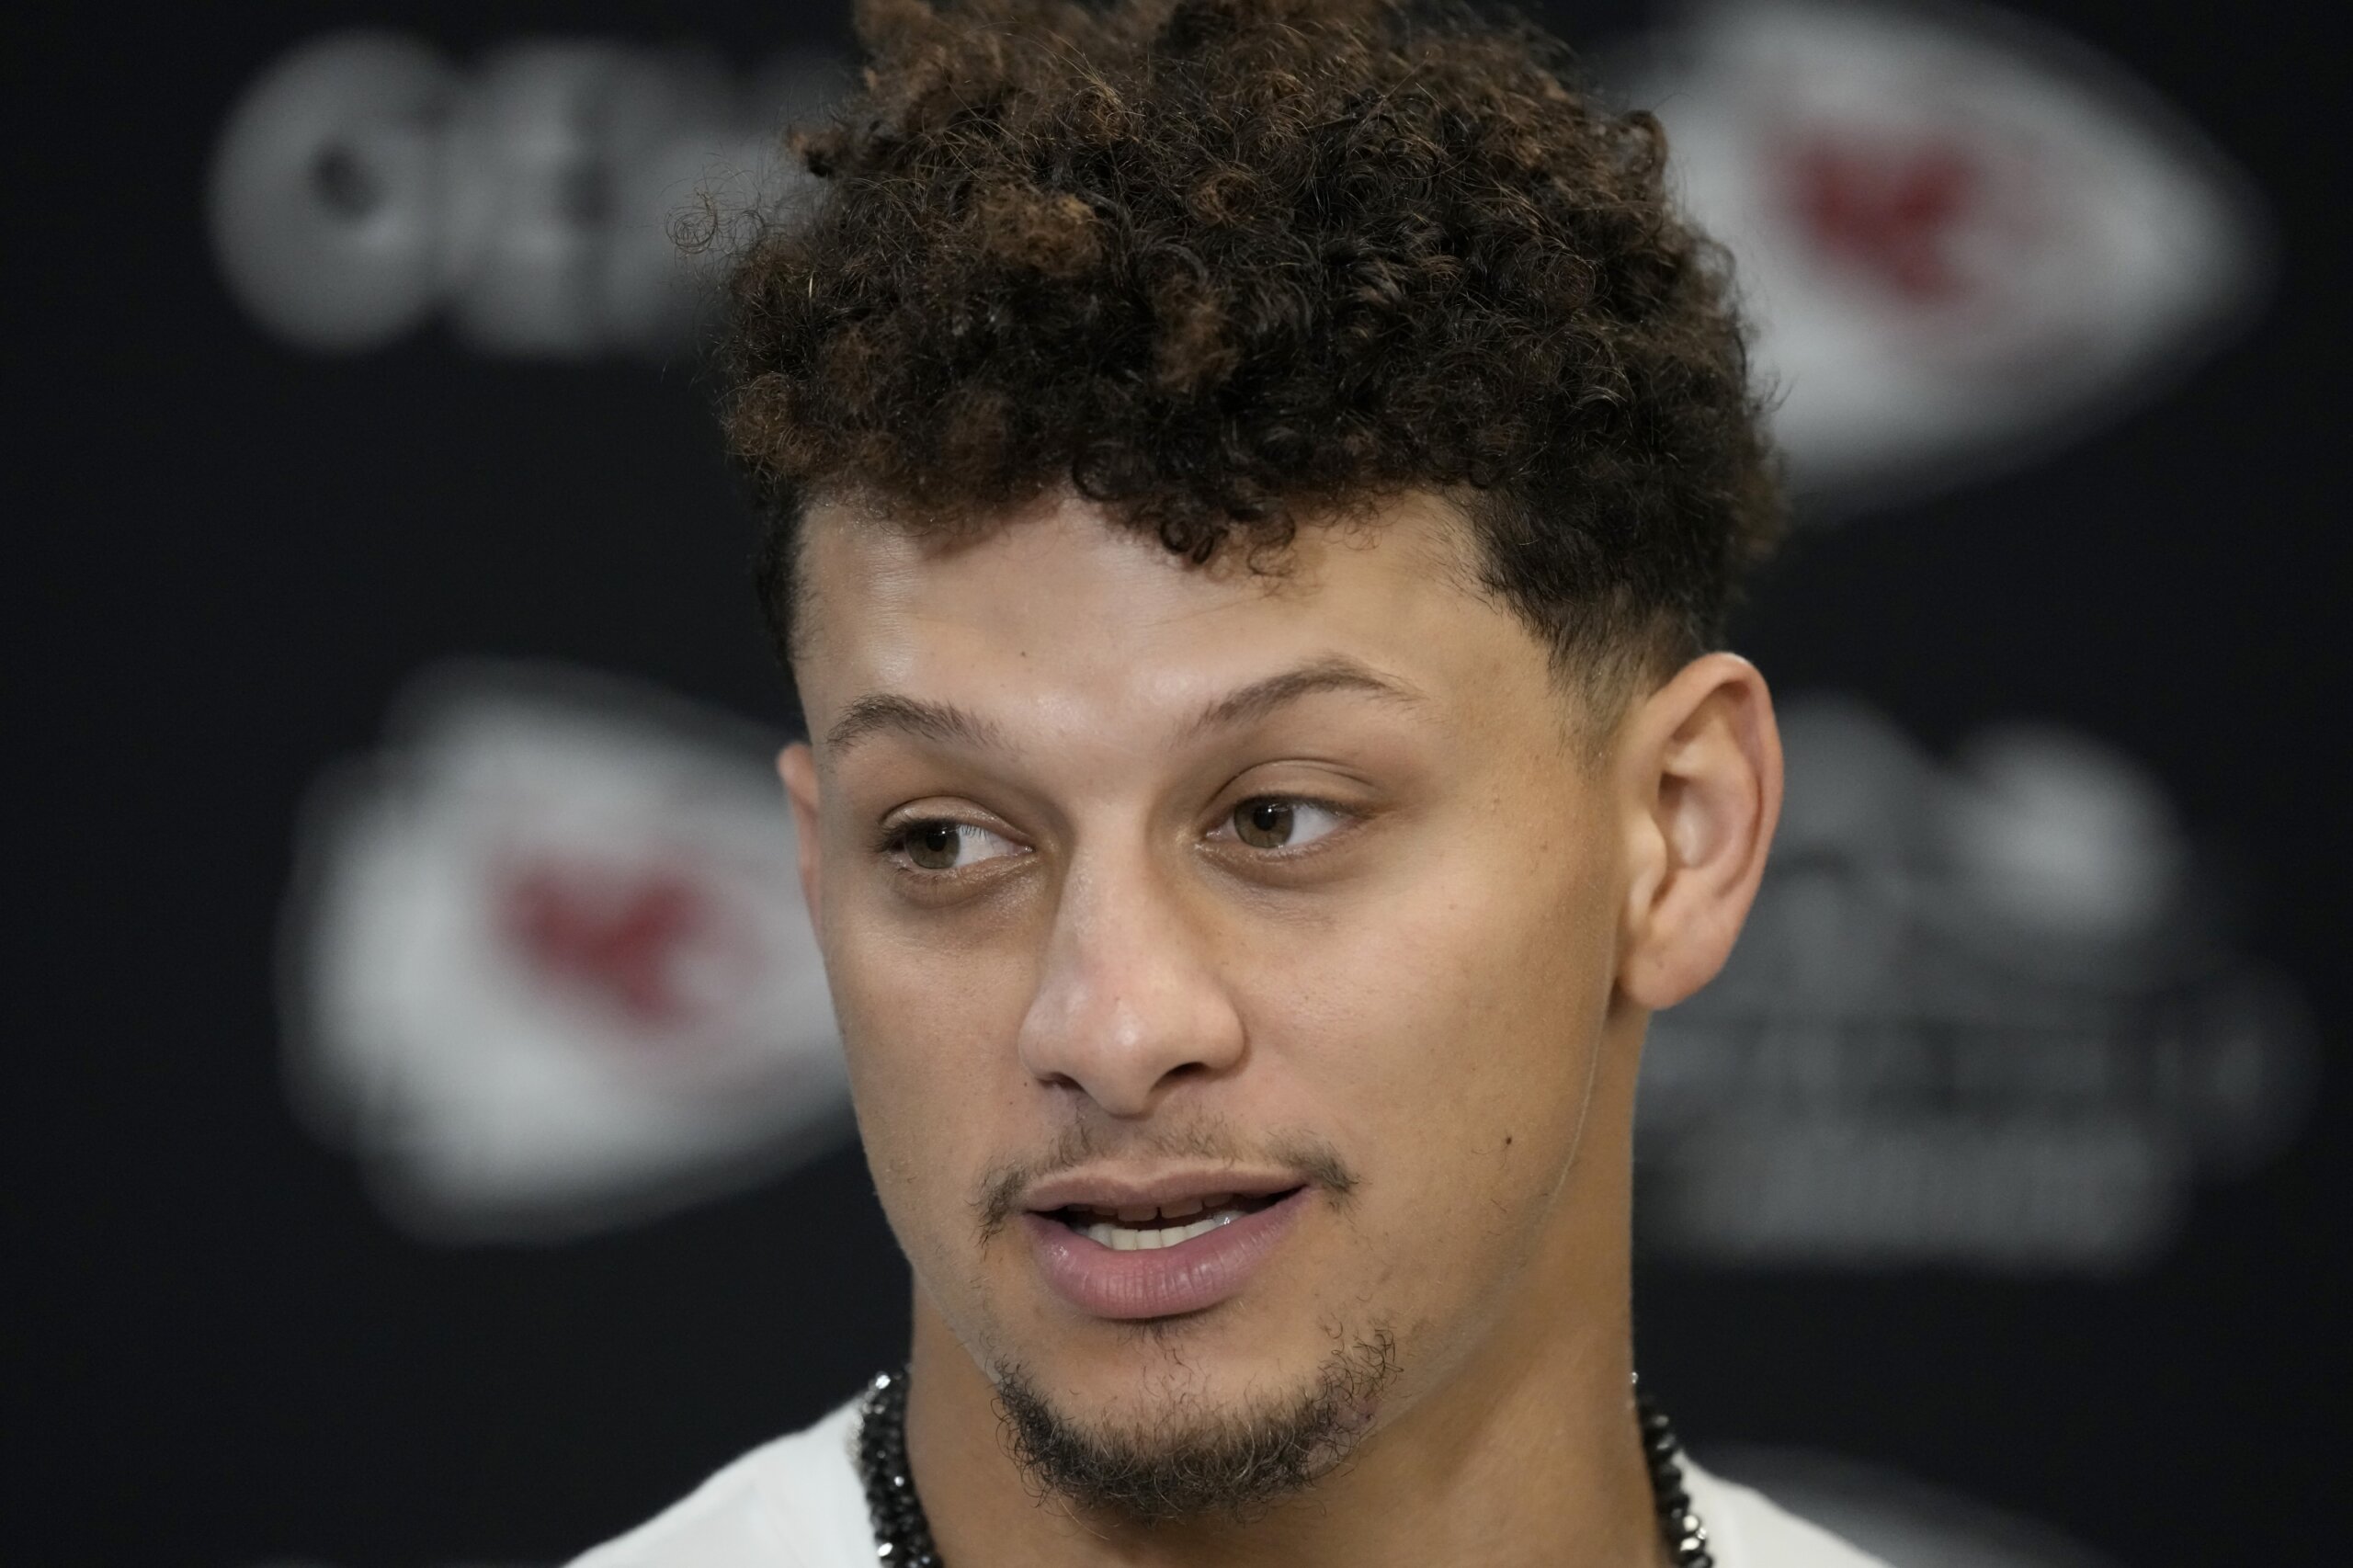 Chiefs add Patrick Mahomes to injury report with flu-like symptoms, but he’ll play against Broncos